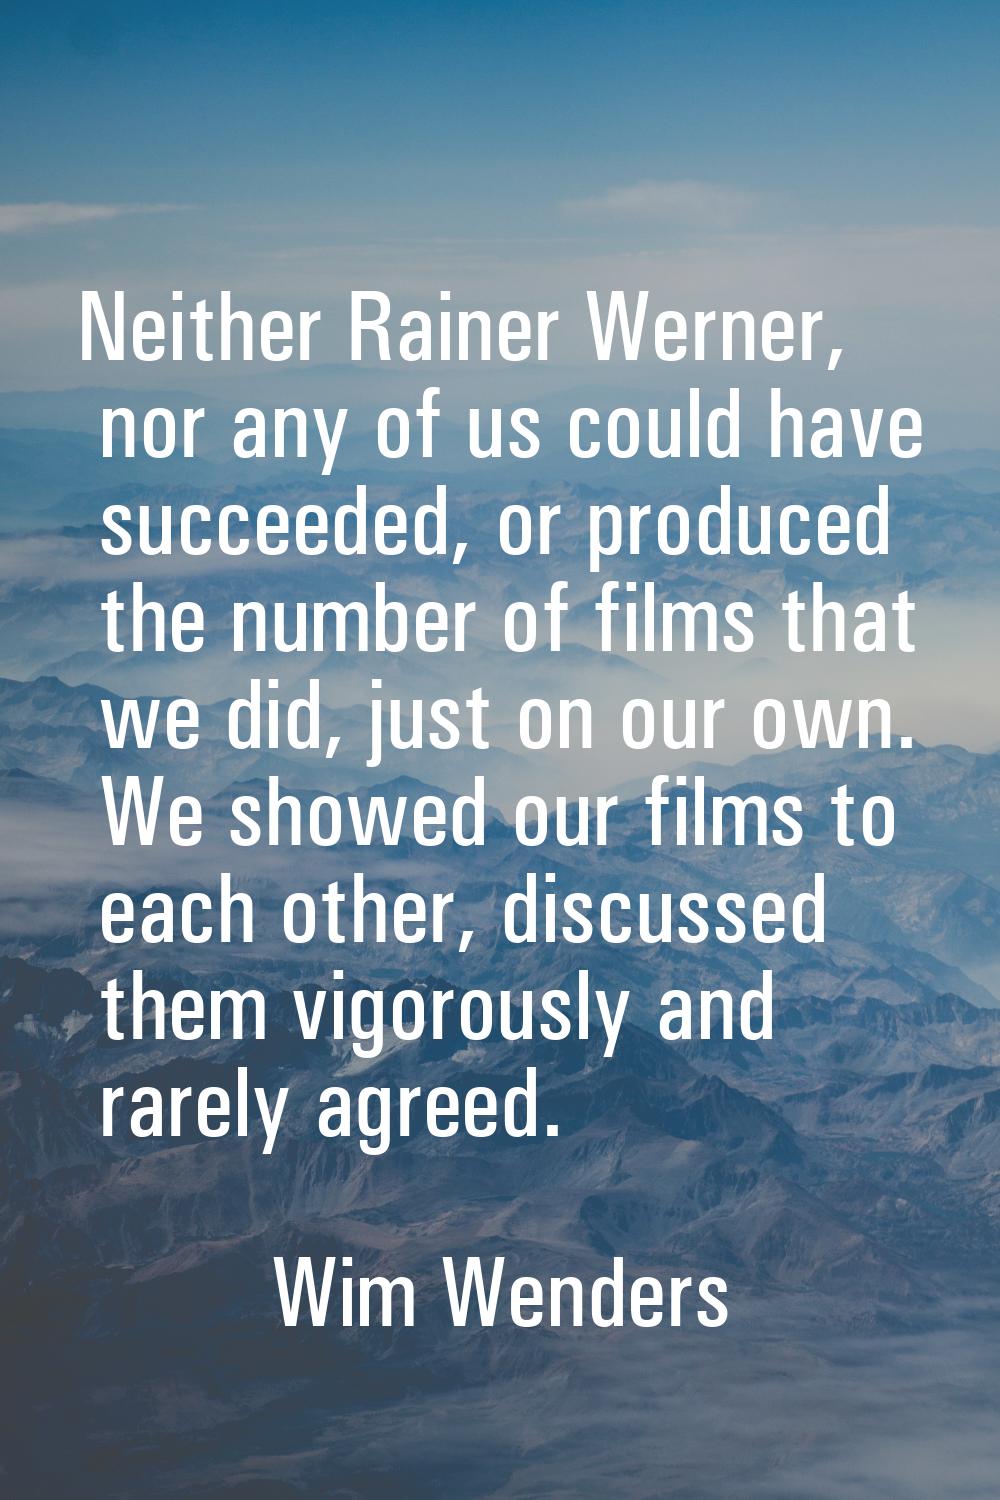 Neither Rainer Werner, nor any of us could have succeeded, or produced the number of films that we 